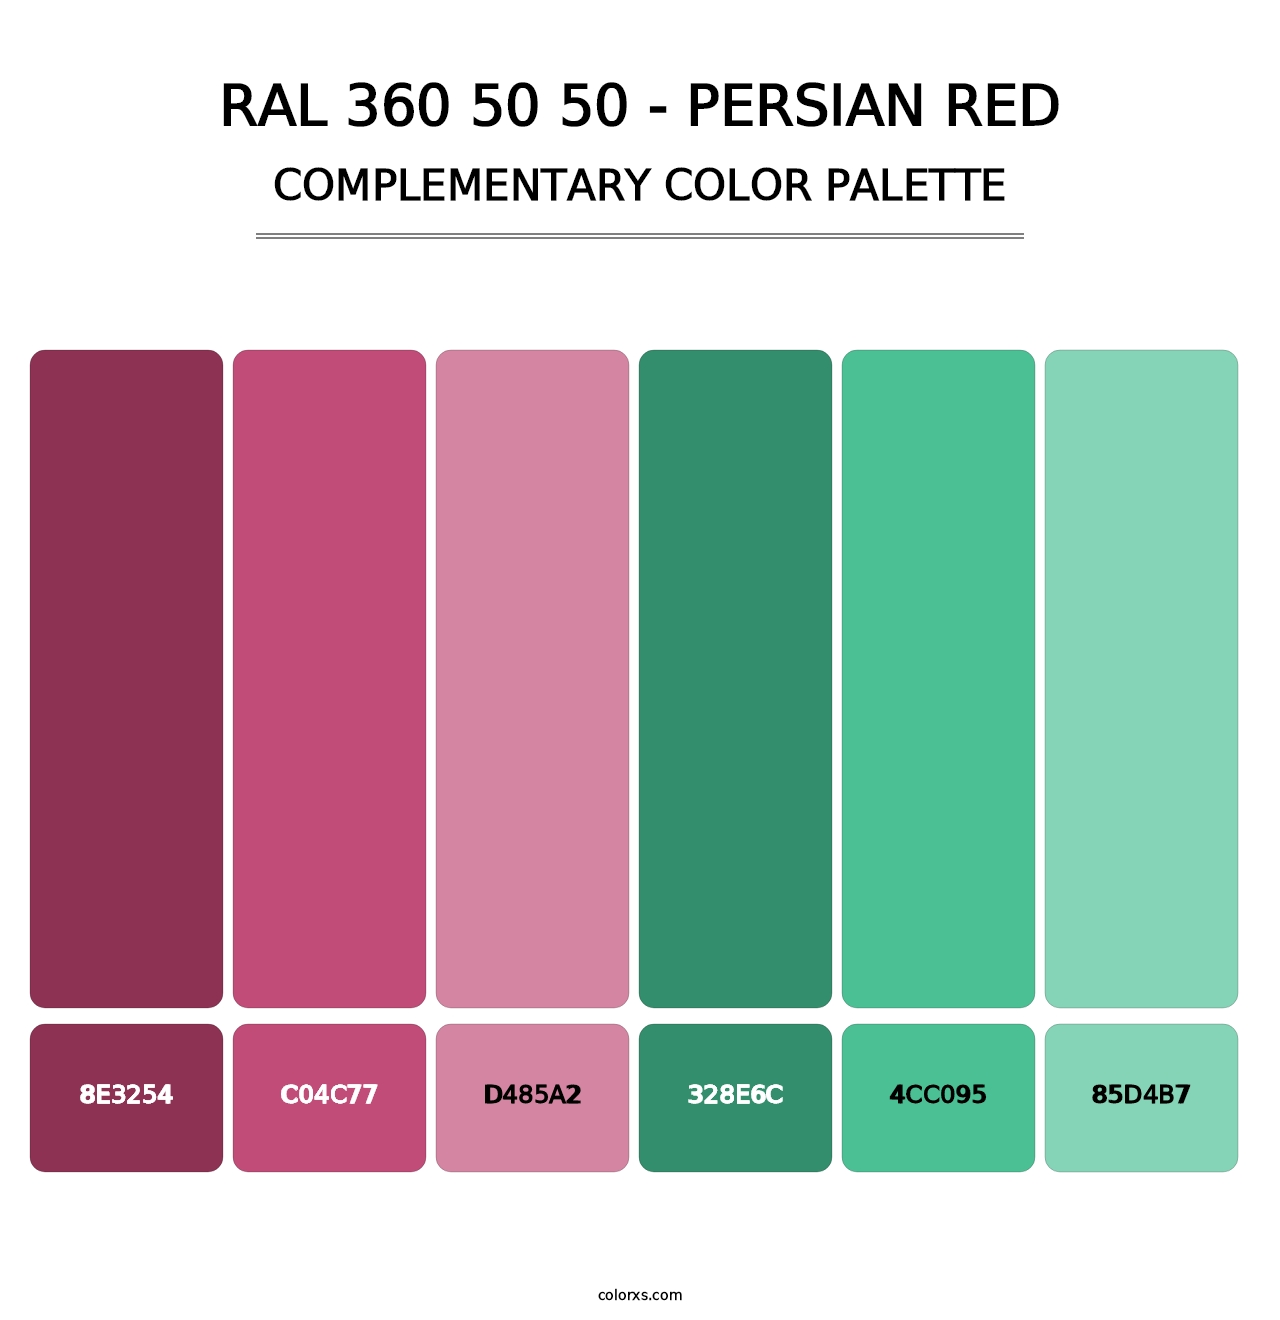 RAL 360 50 50 - Persian Red - Complementary Color Palette